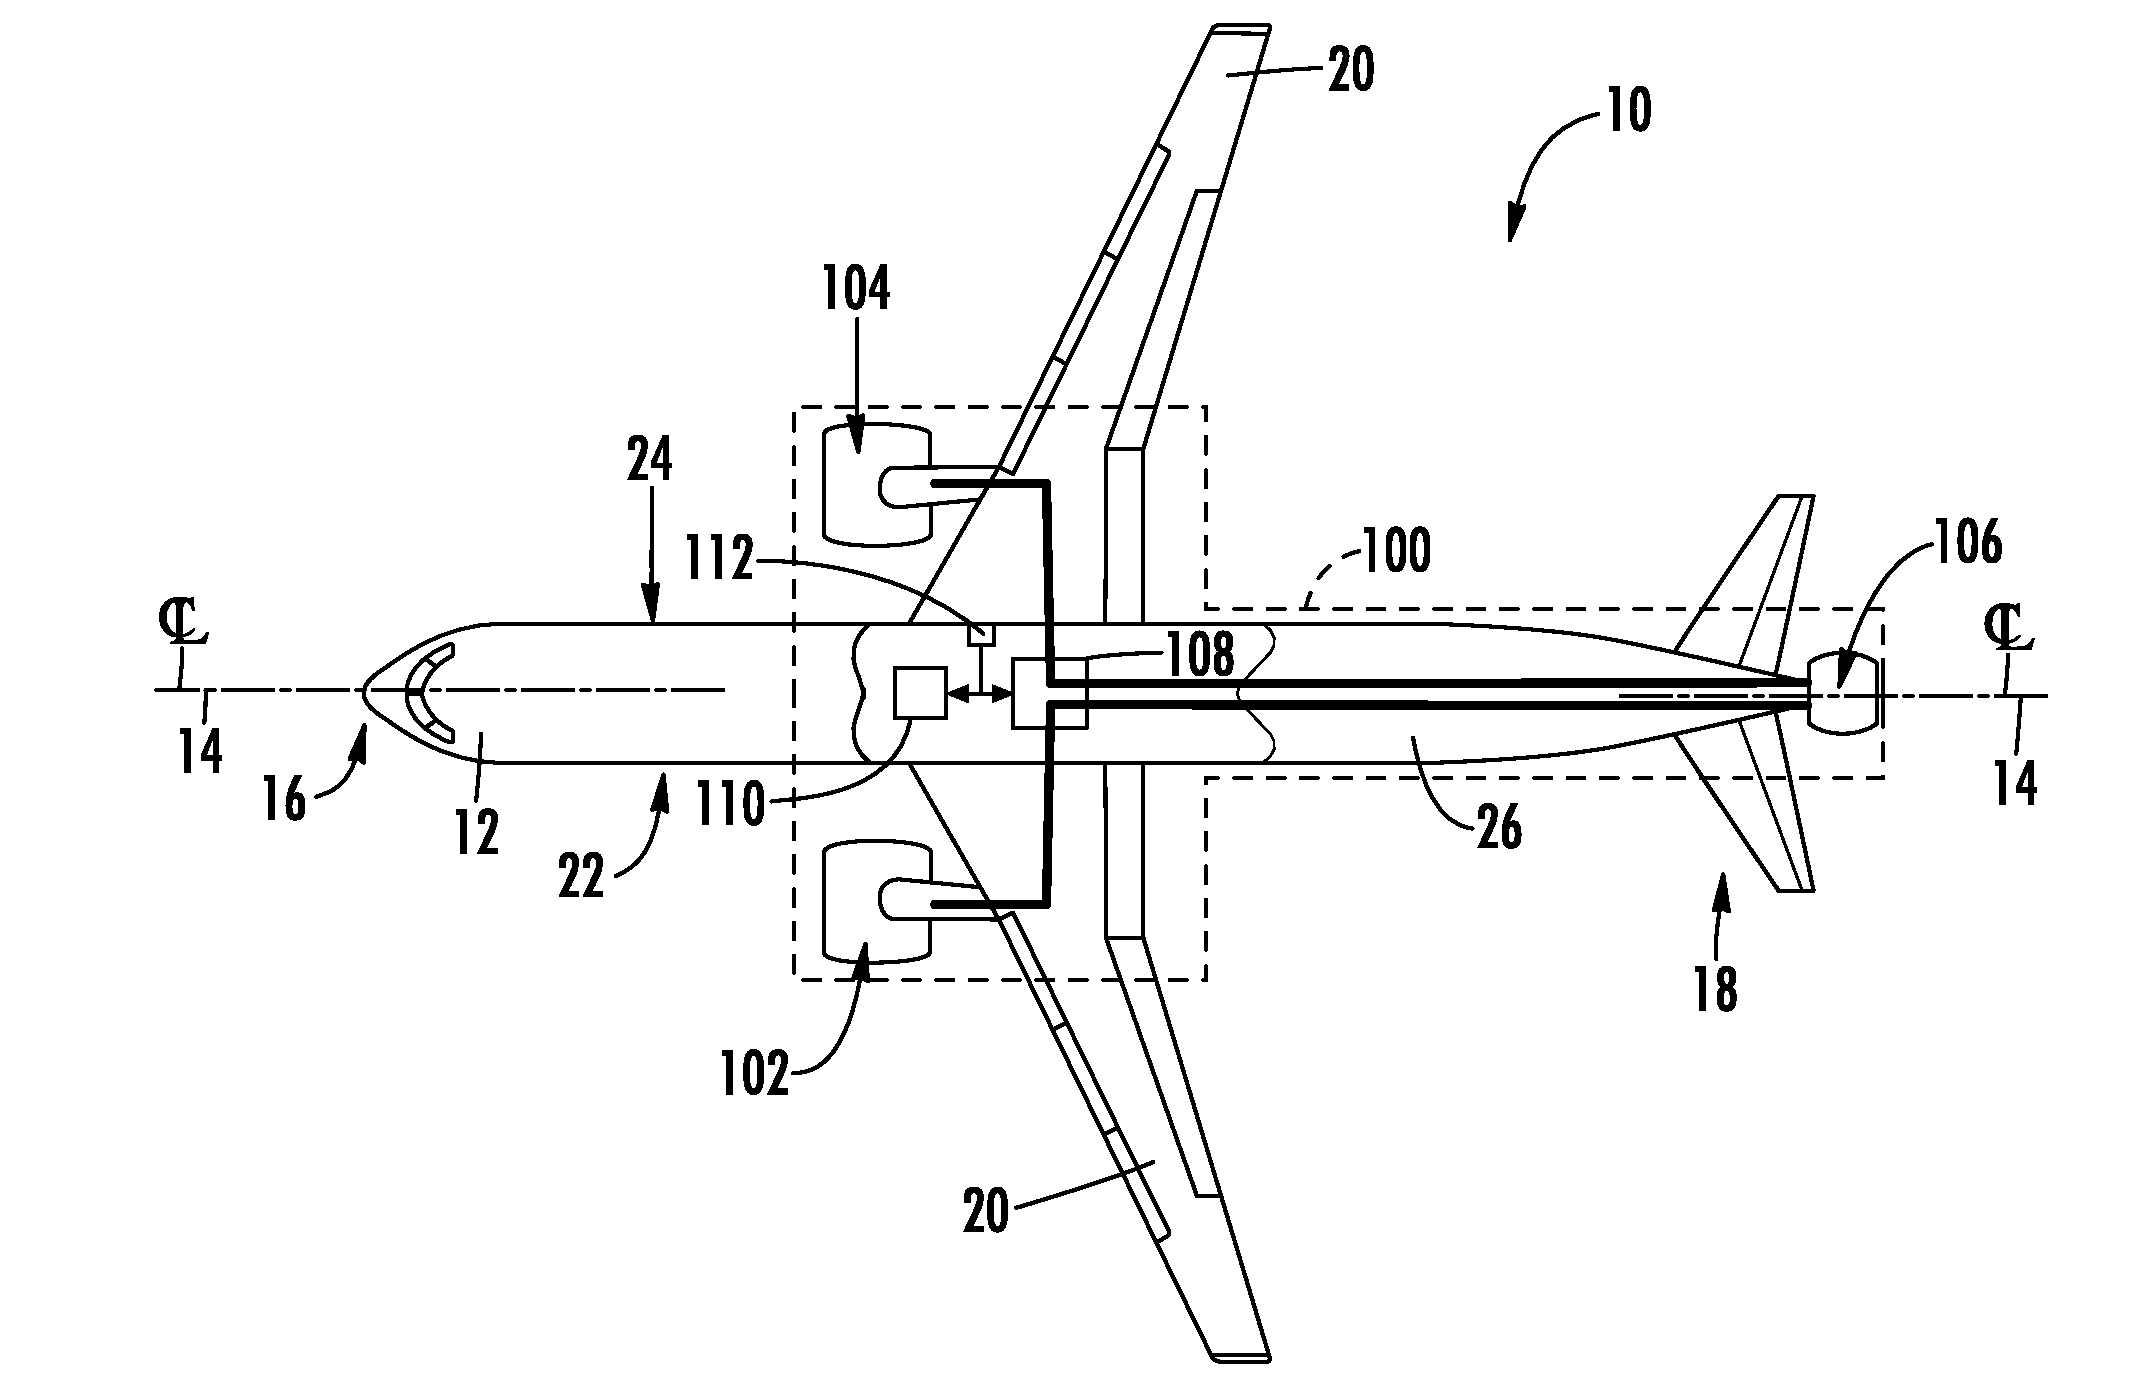 Gas-electric propulsion system for an aircraft